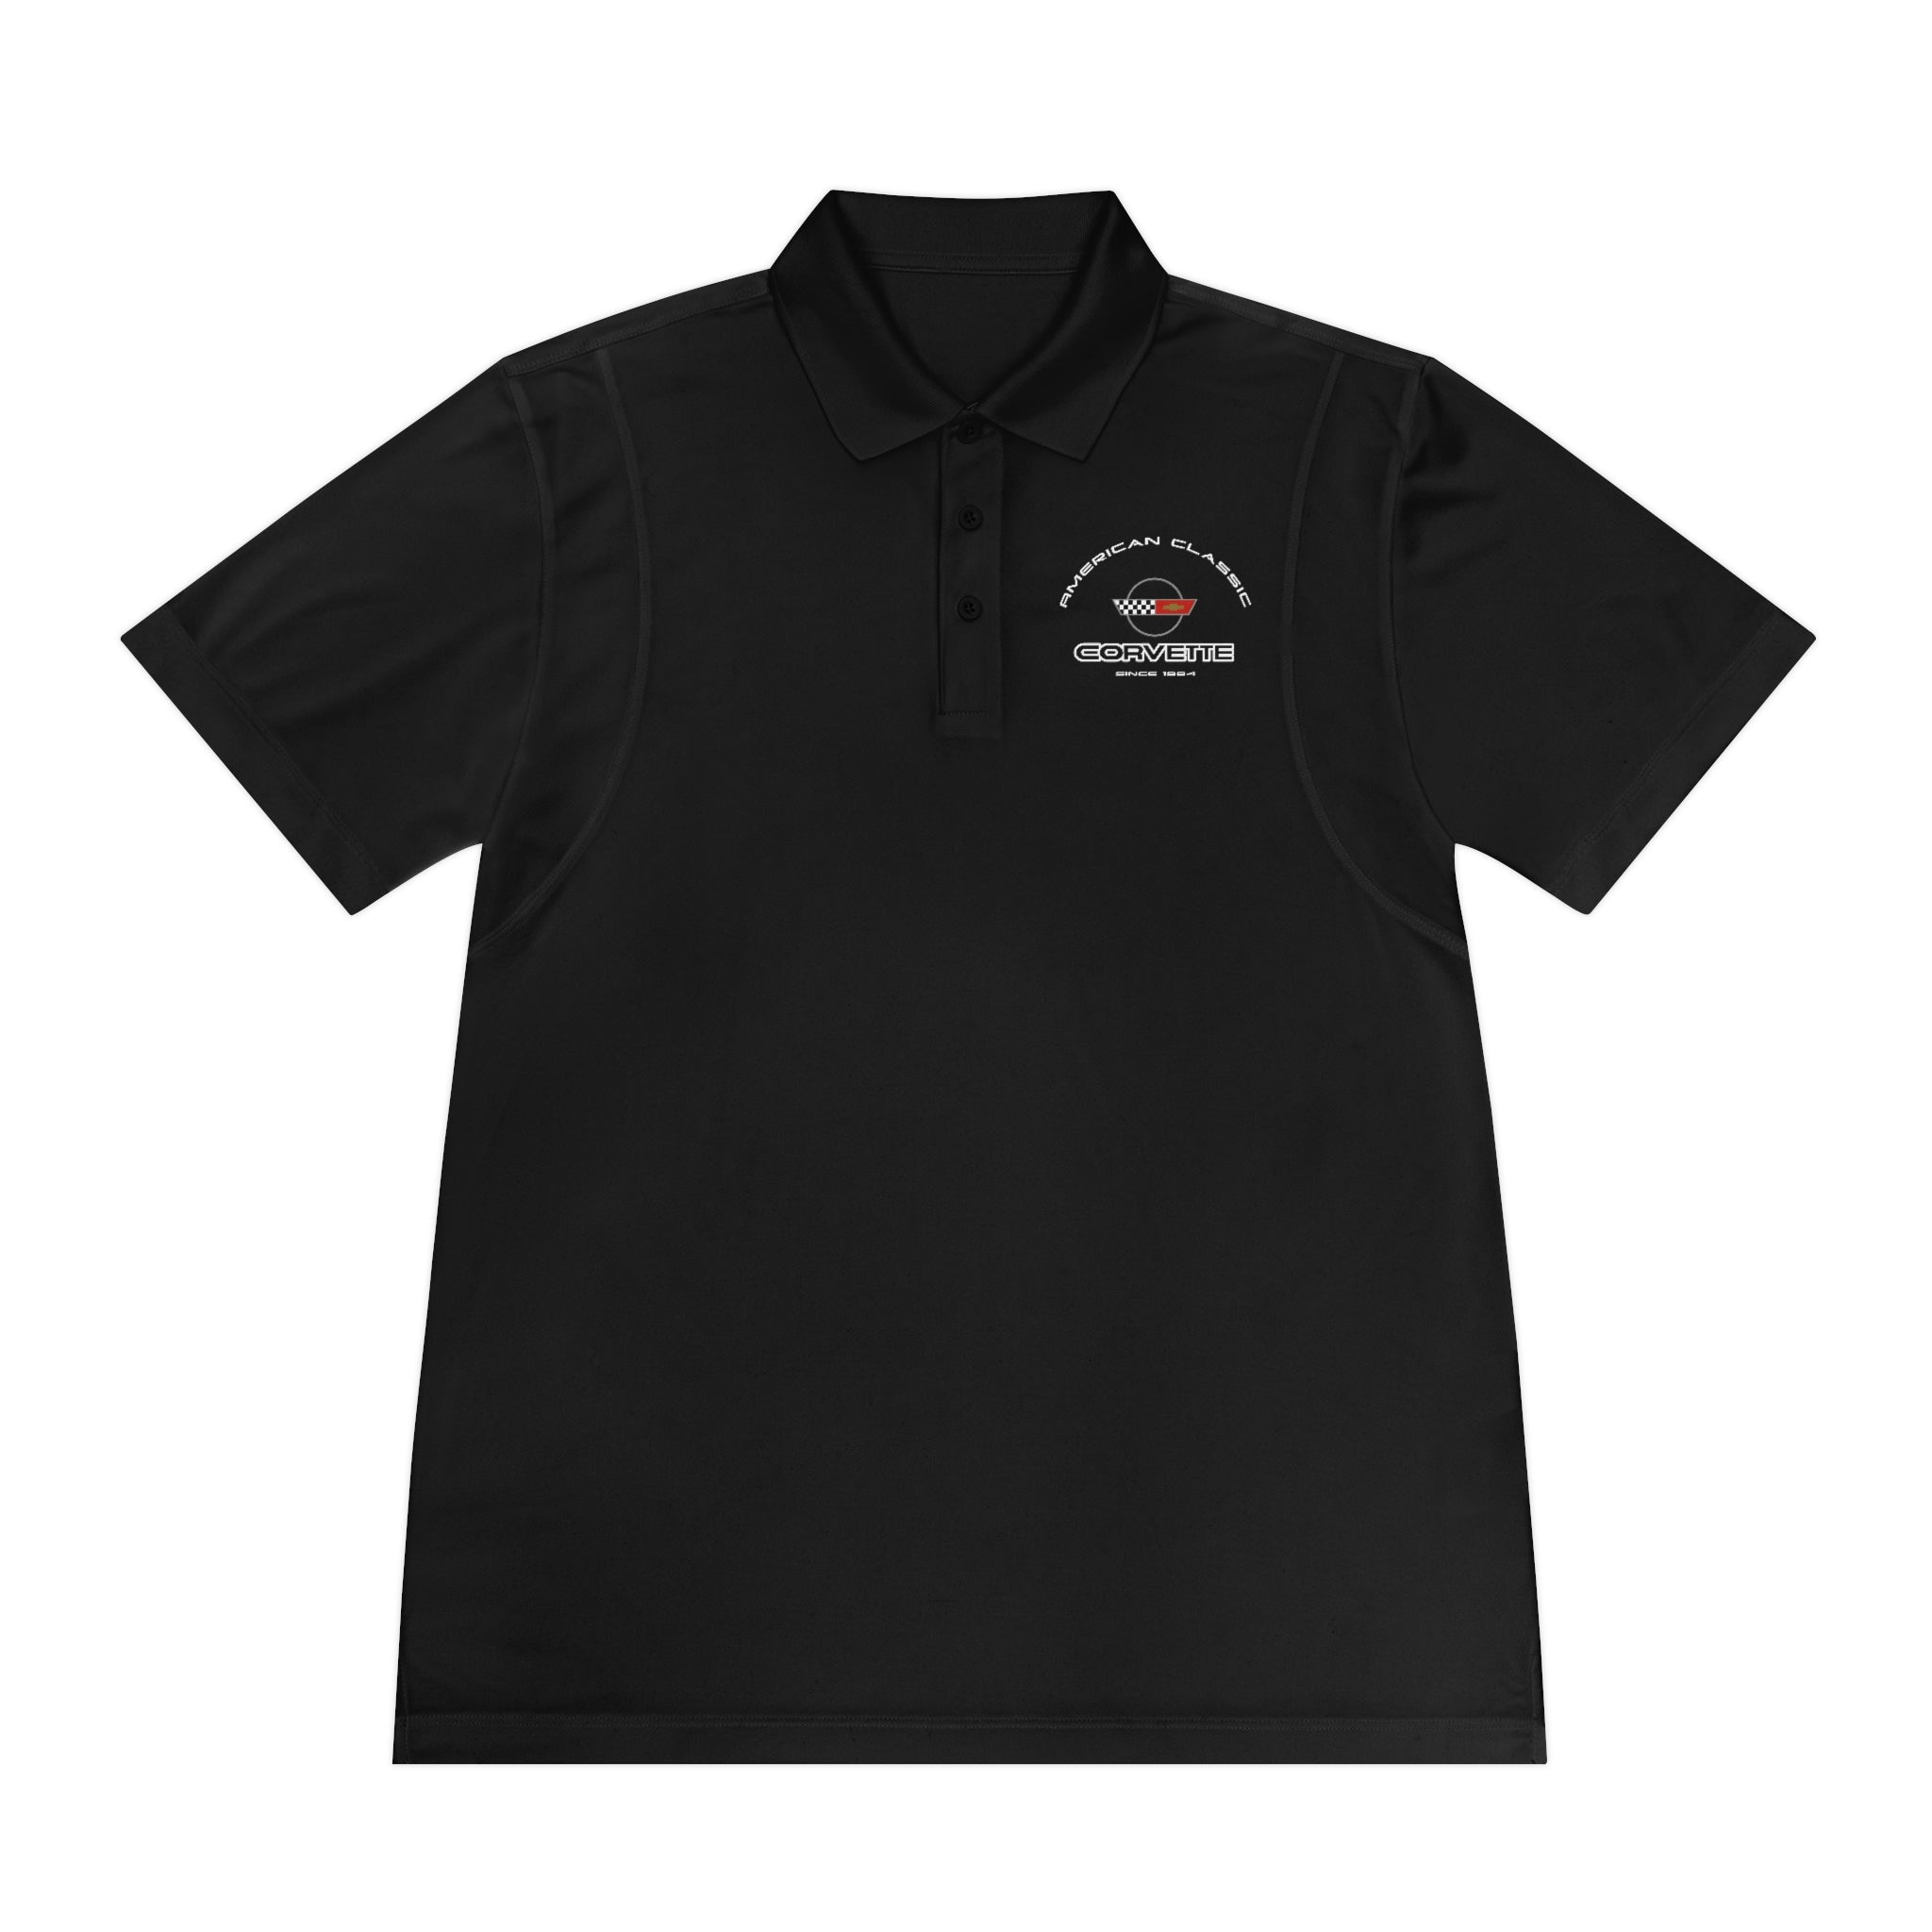 c4-corvette-mens-sport-polo-shirt-perfect-when-performance-and-style-is-part-of-the-day